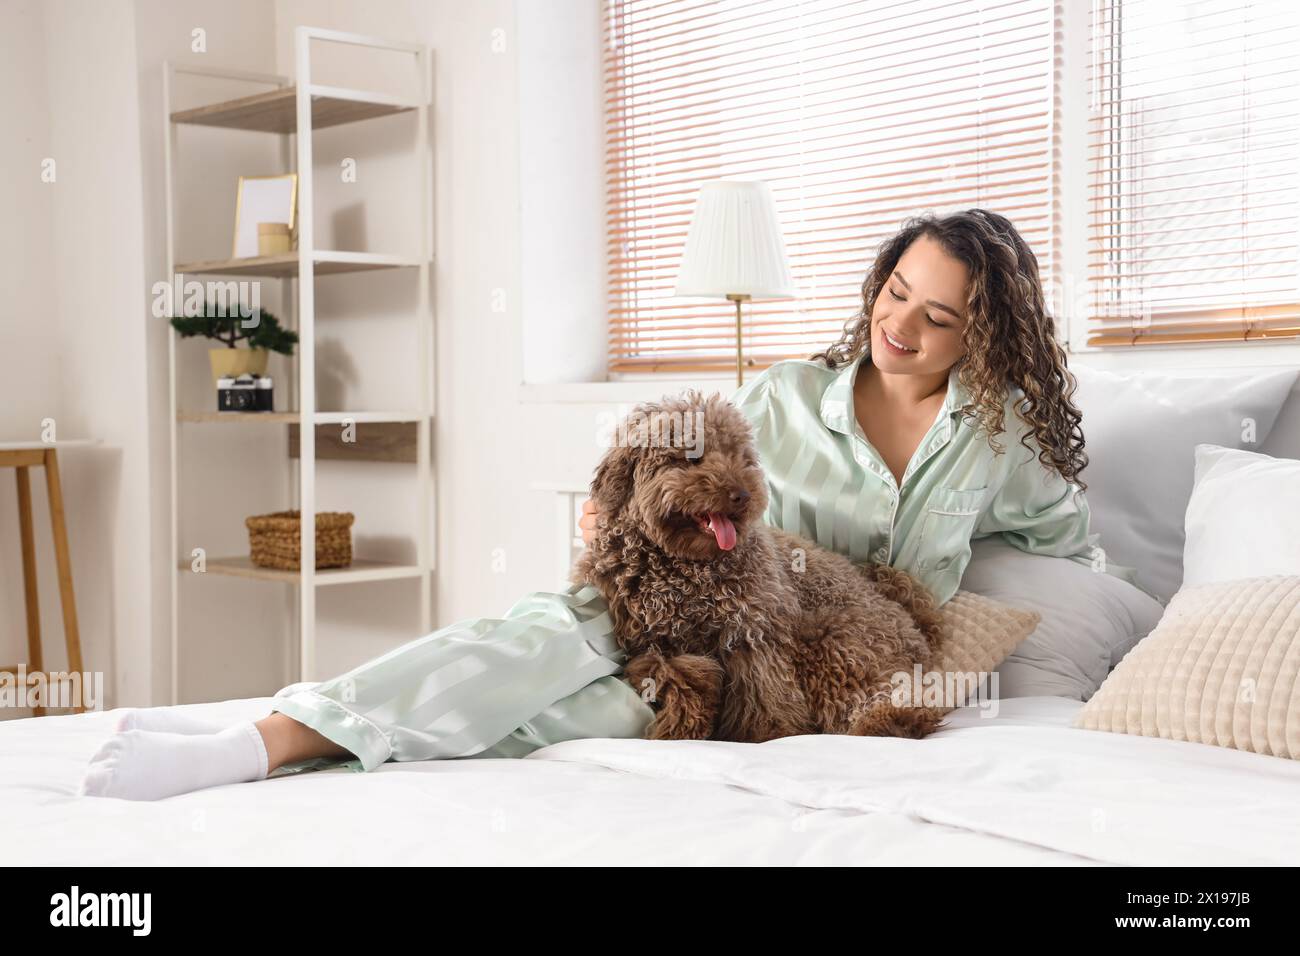 Young woman with cute poodle lying in bedroom Stock Photo